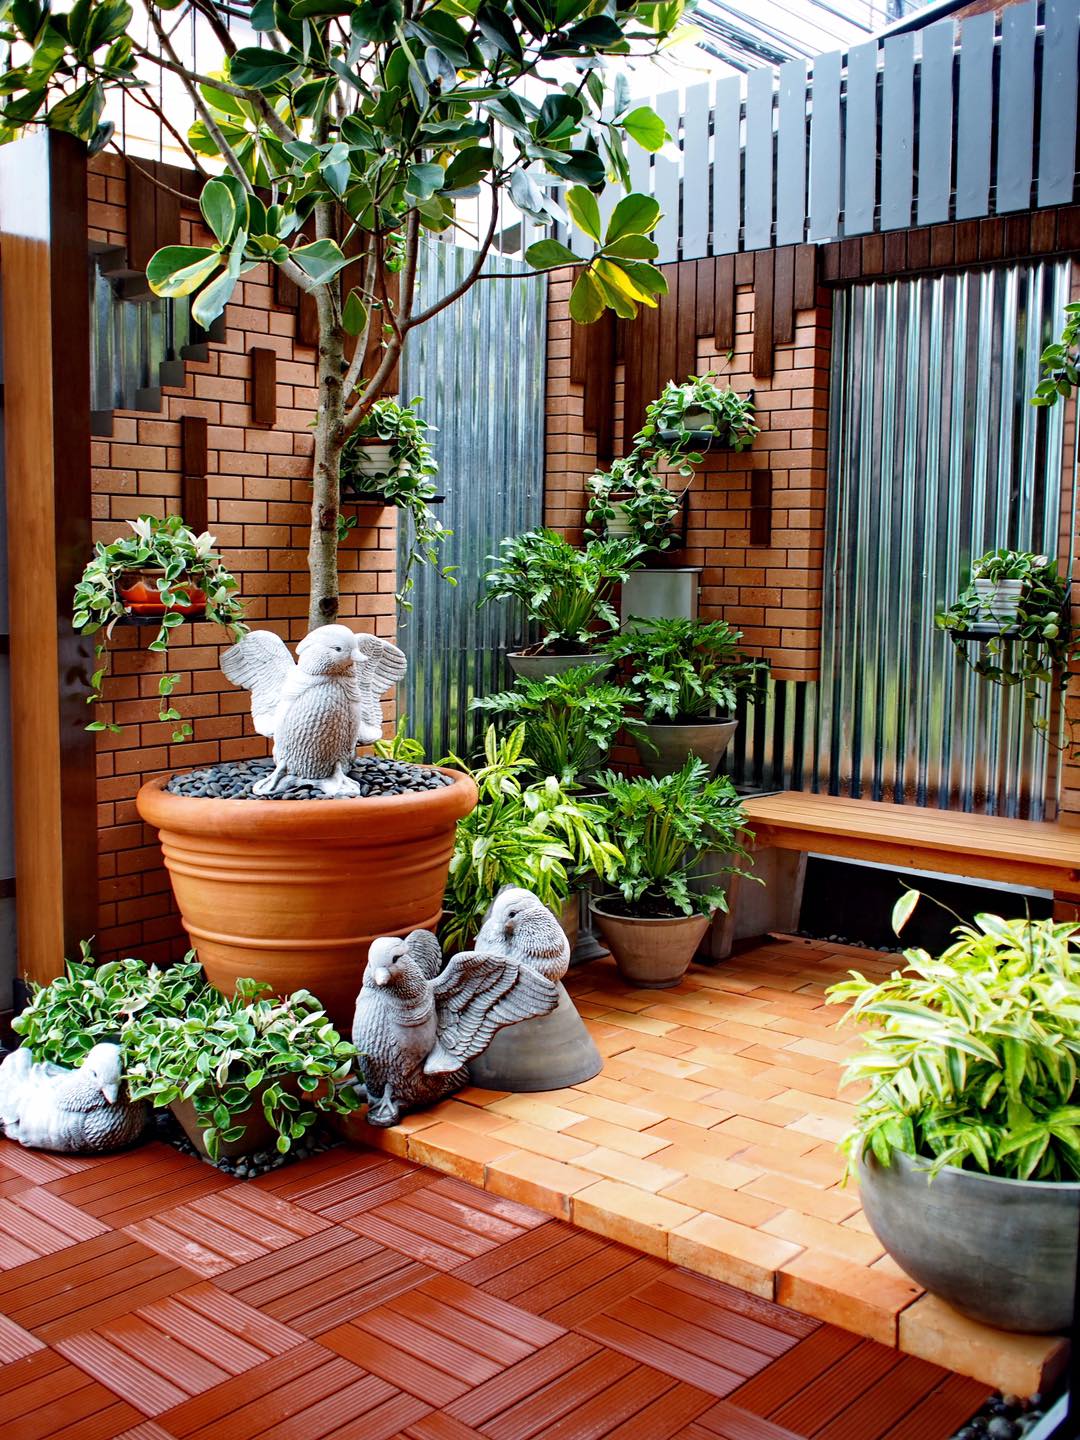 31 Beautiful “Side Yard” Landscaping Ideas to Make Your Home Look Better